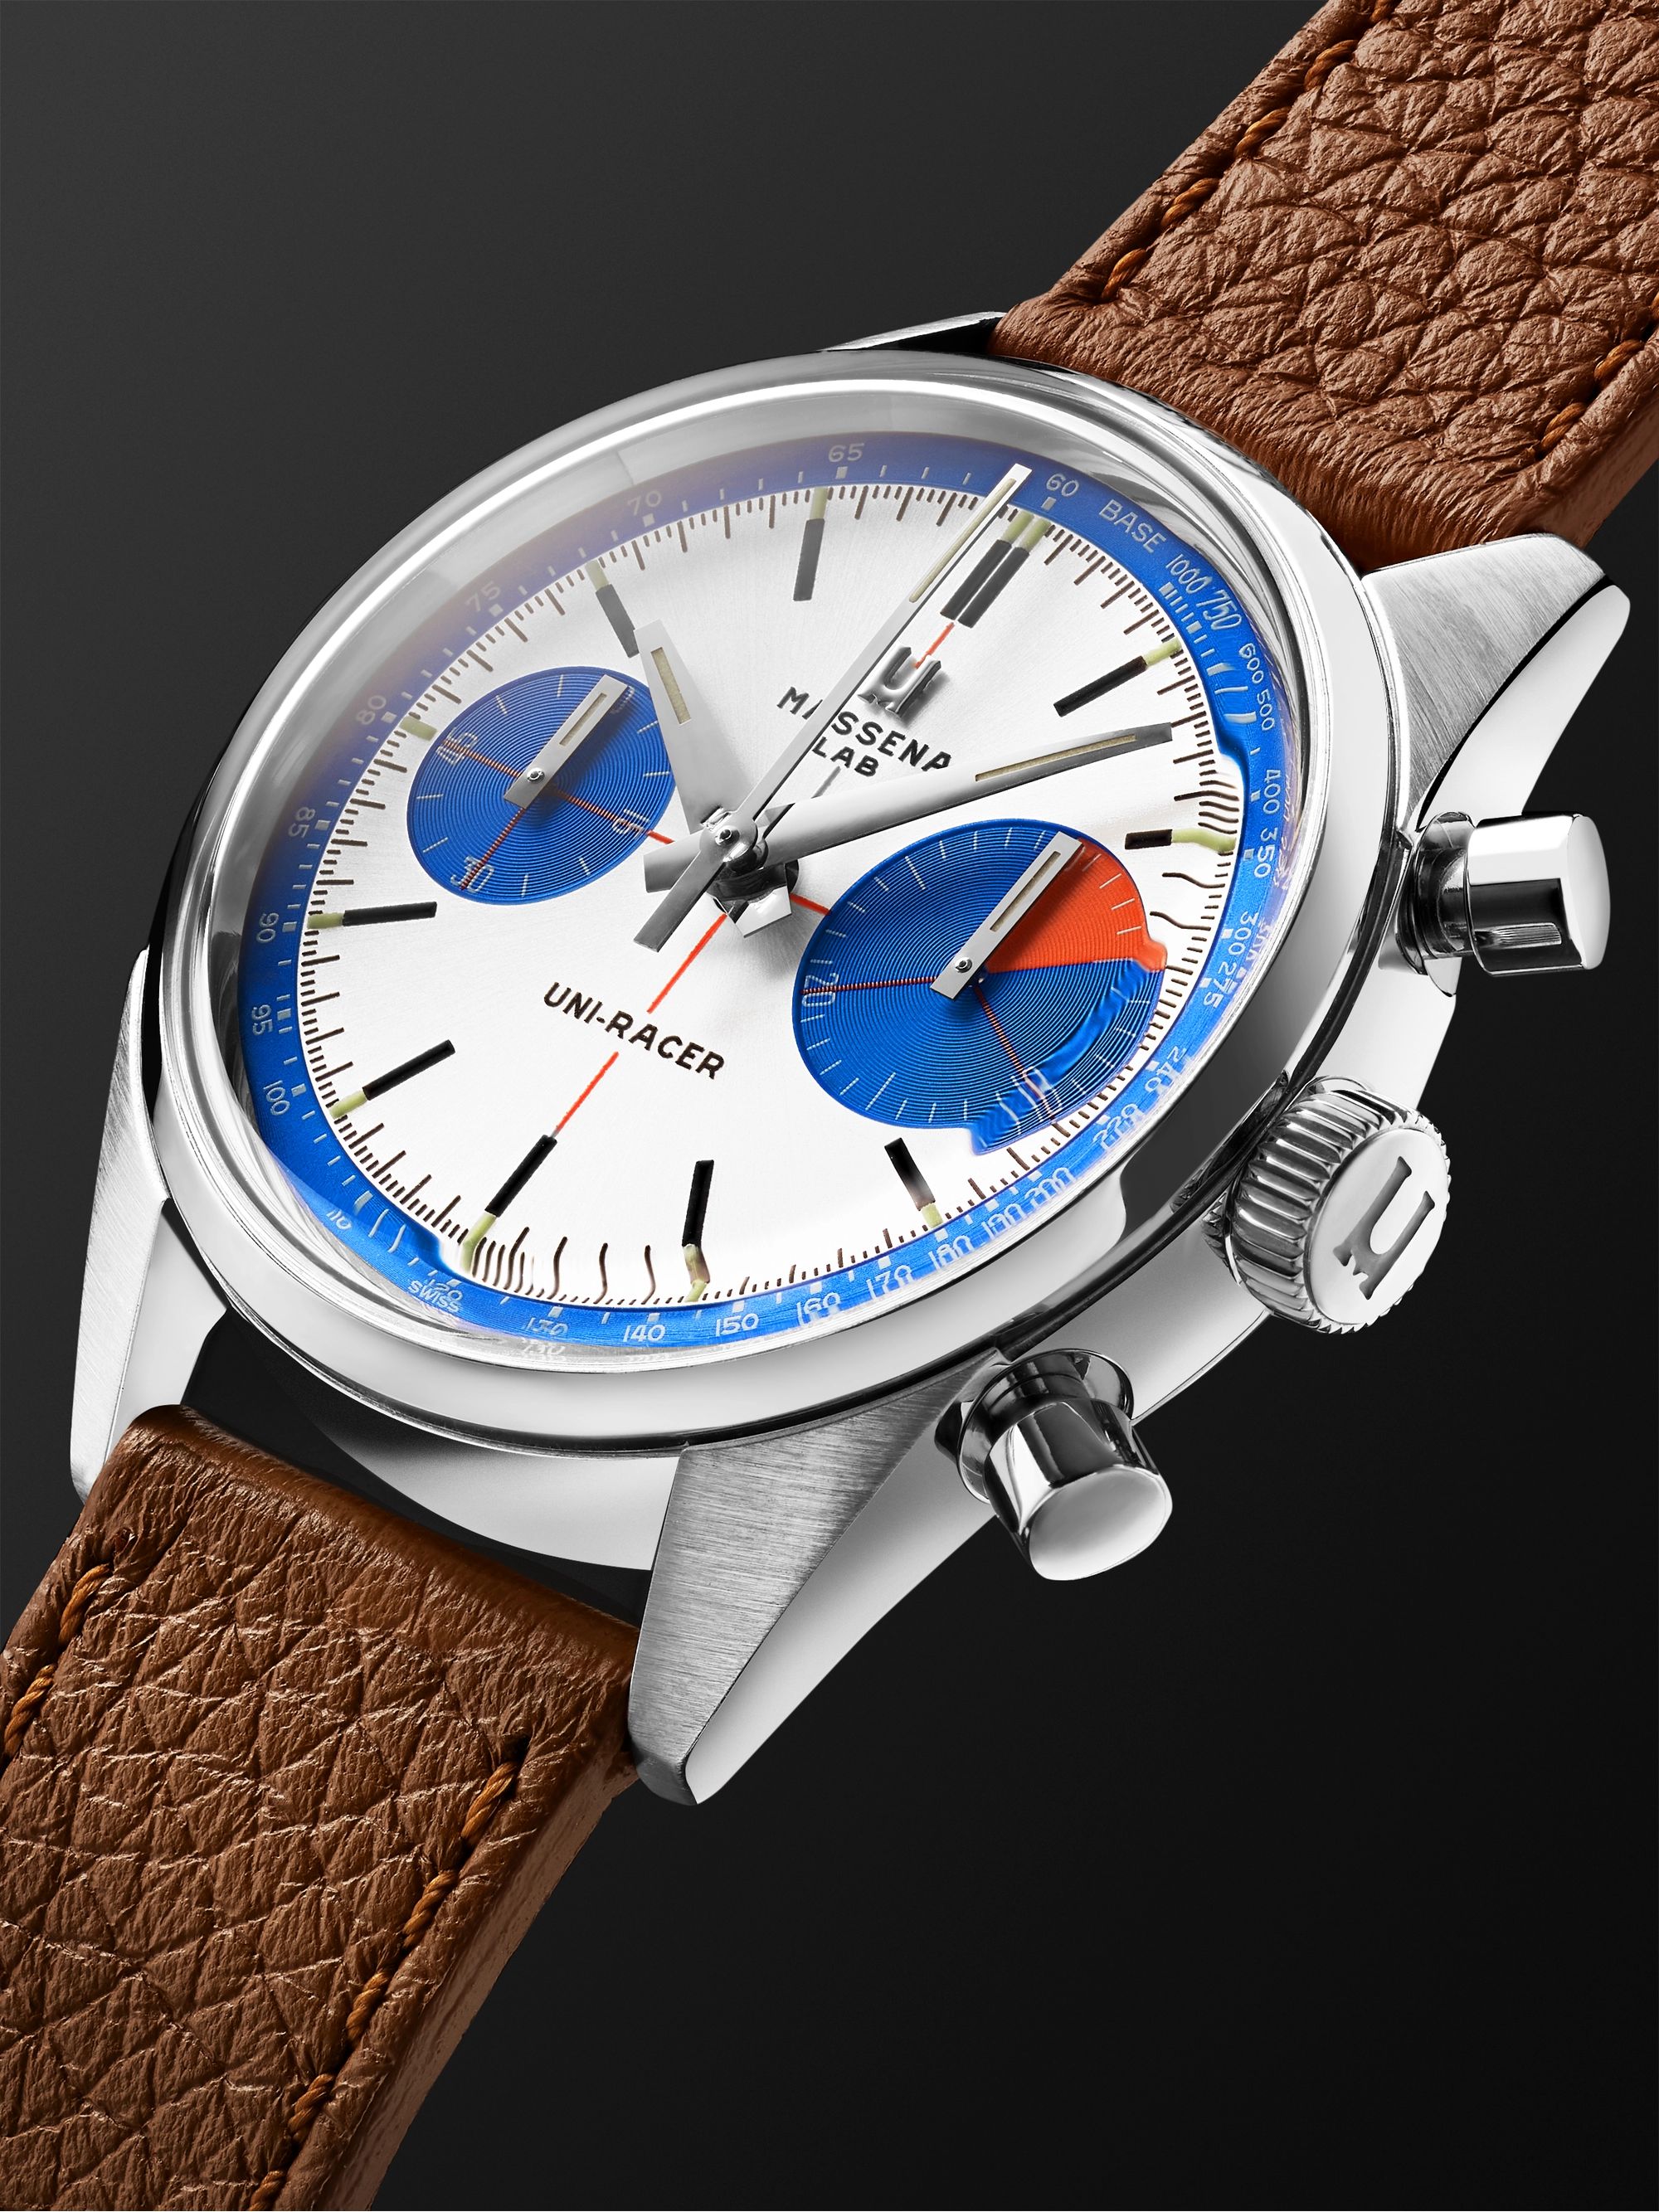 MASSENA LAB Uni-Racer Limited Edition Hand-Wound Chronograph 39mm Stainless Steel and Full-Grain Leather Watch, Ref. No. UR-003-RAL